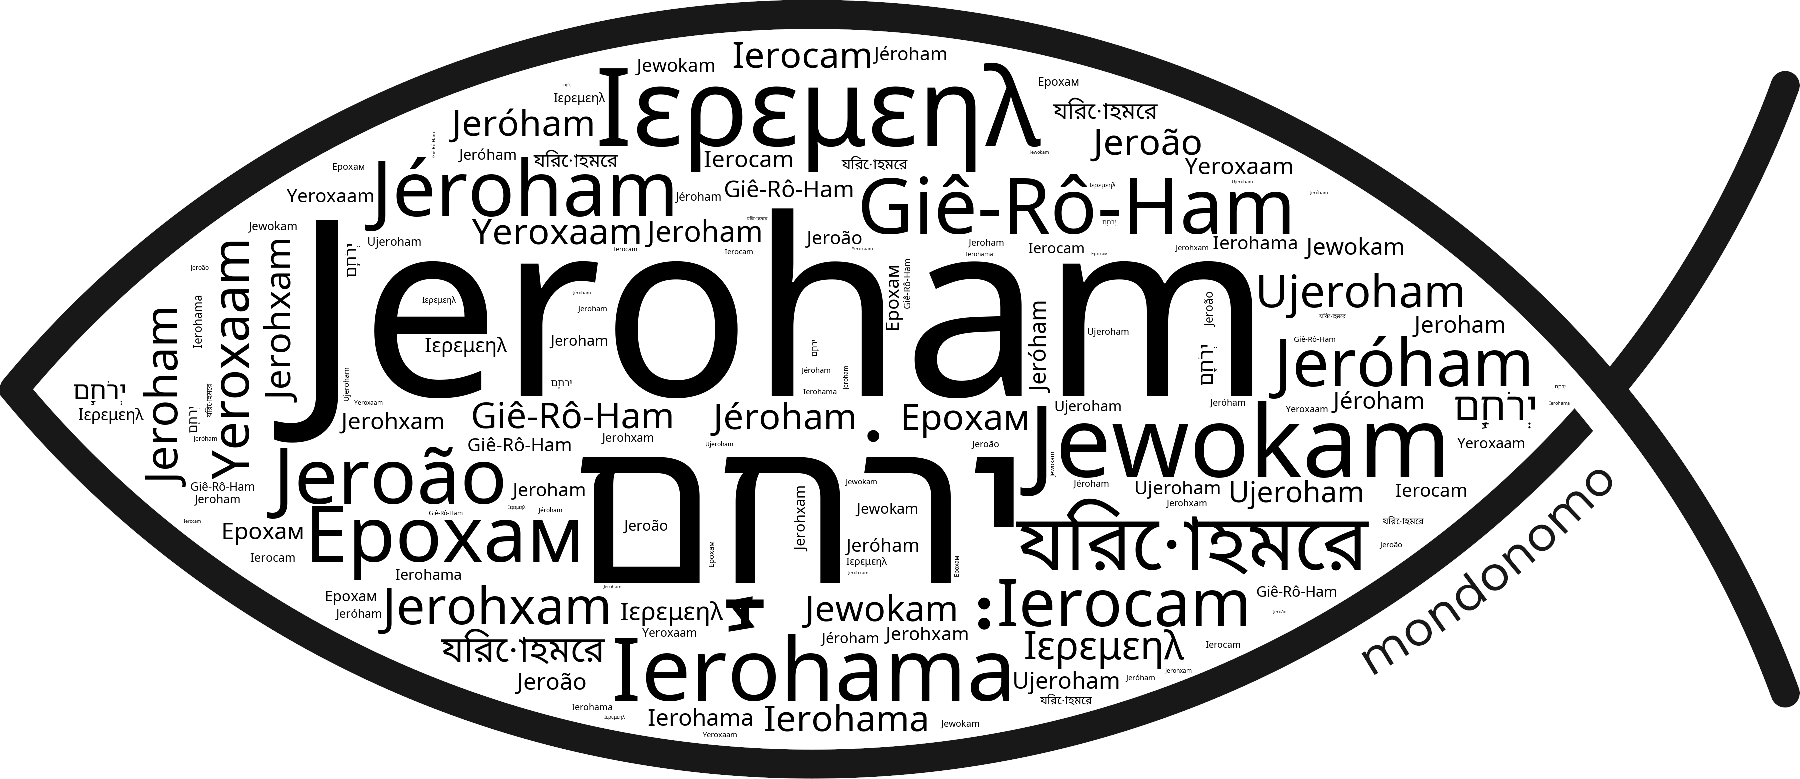 Name Jeroham in the world's Bibles